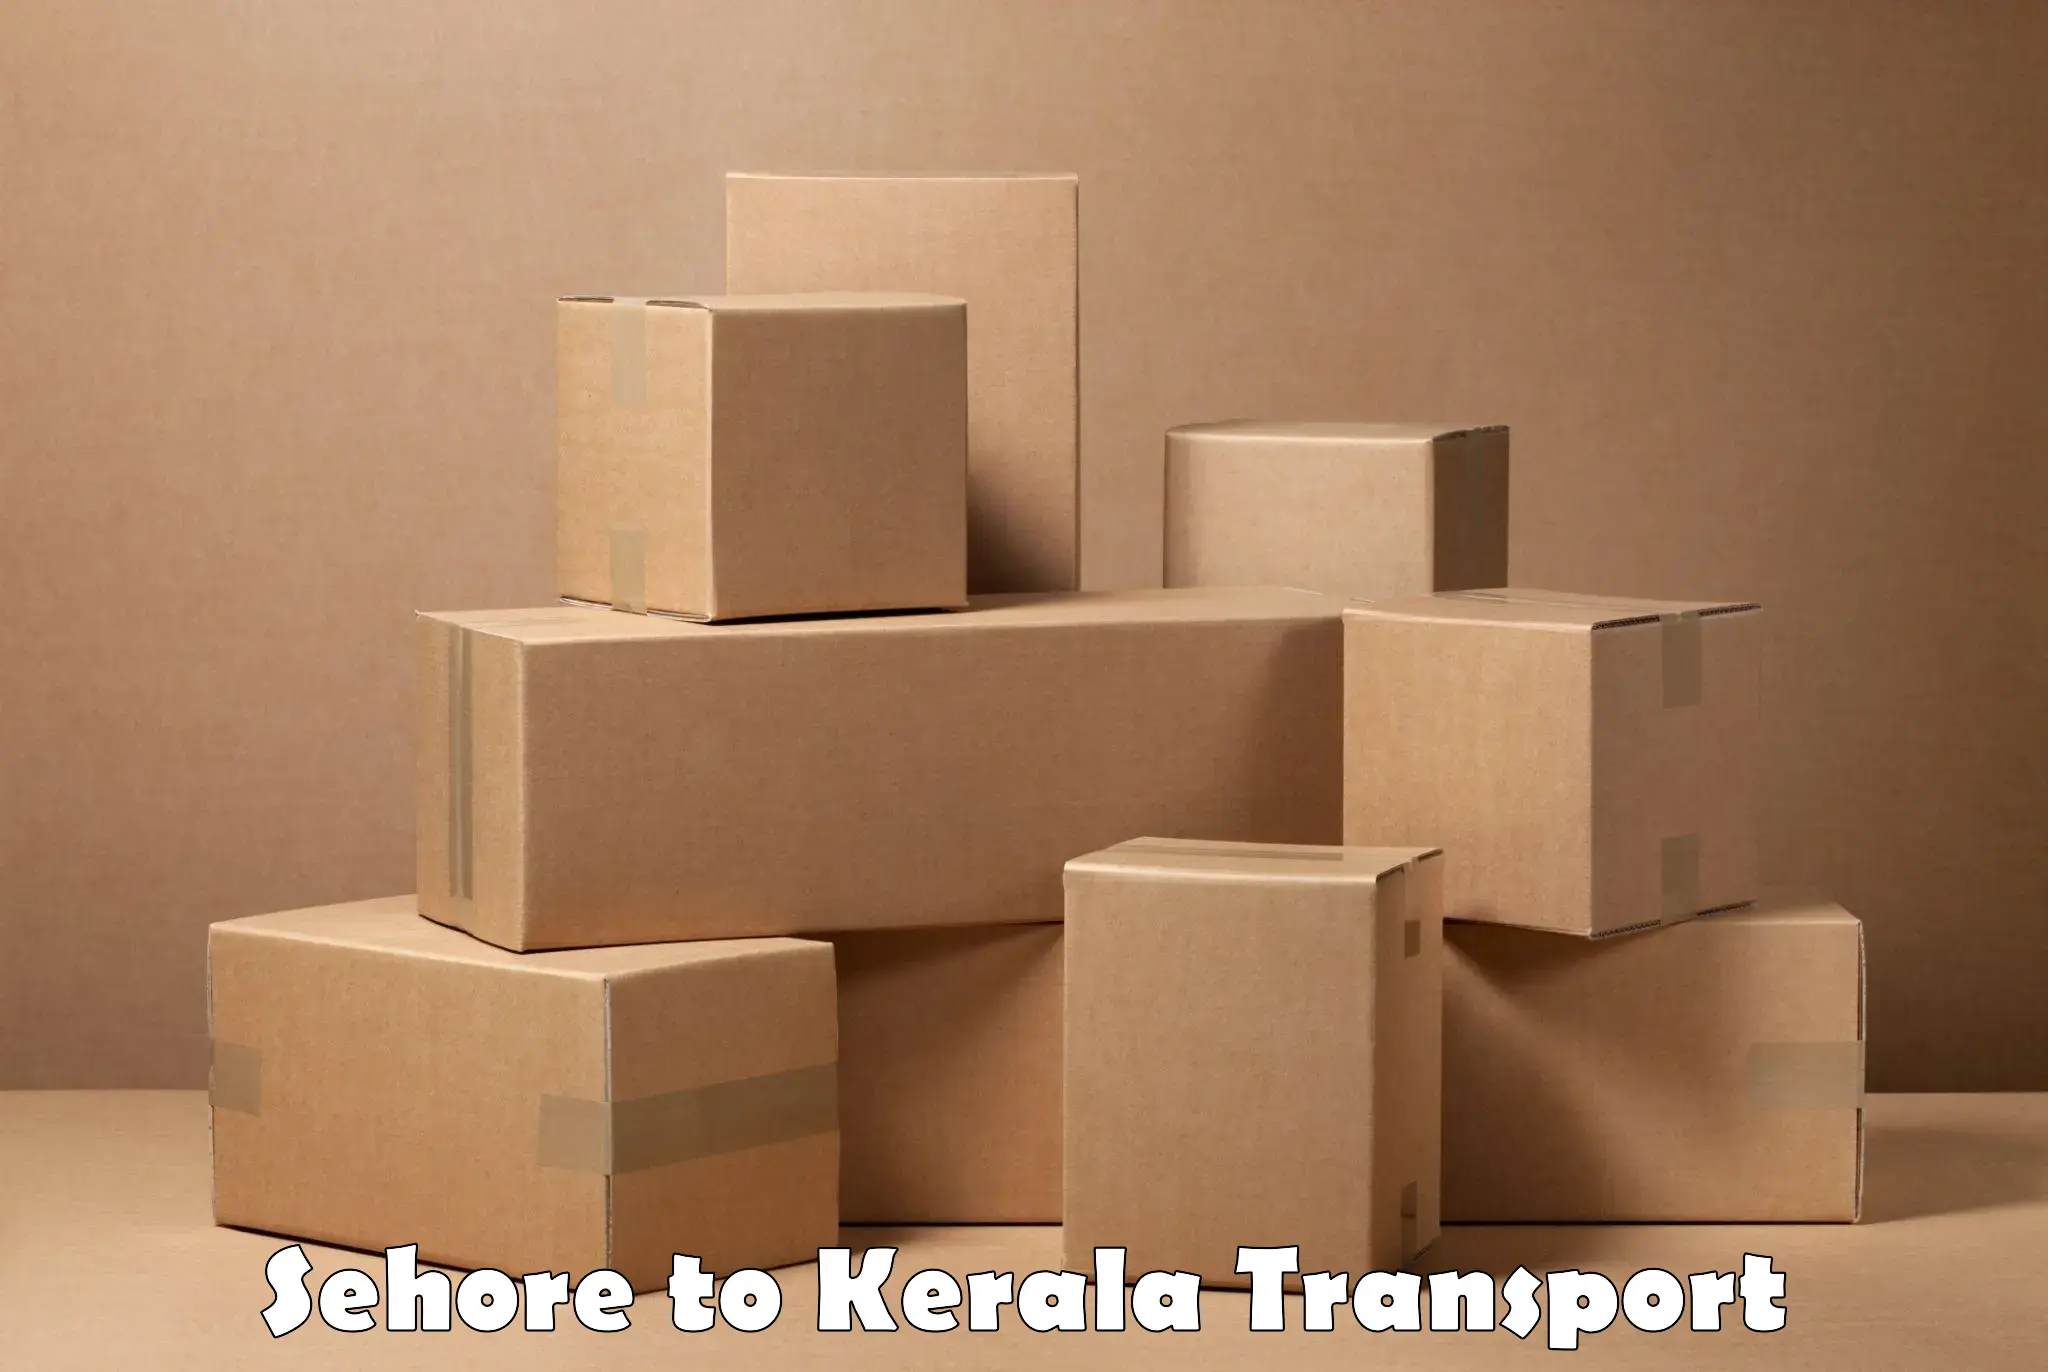 Road transport online services Sehore to Kerala